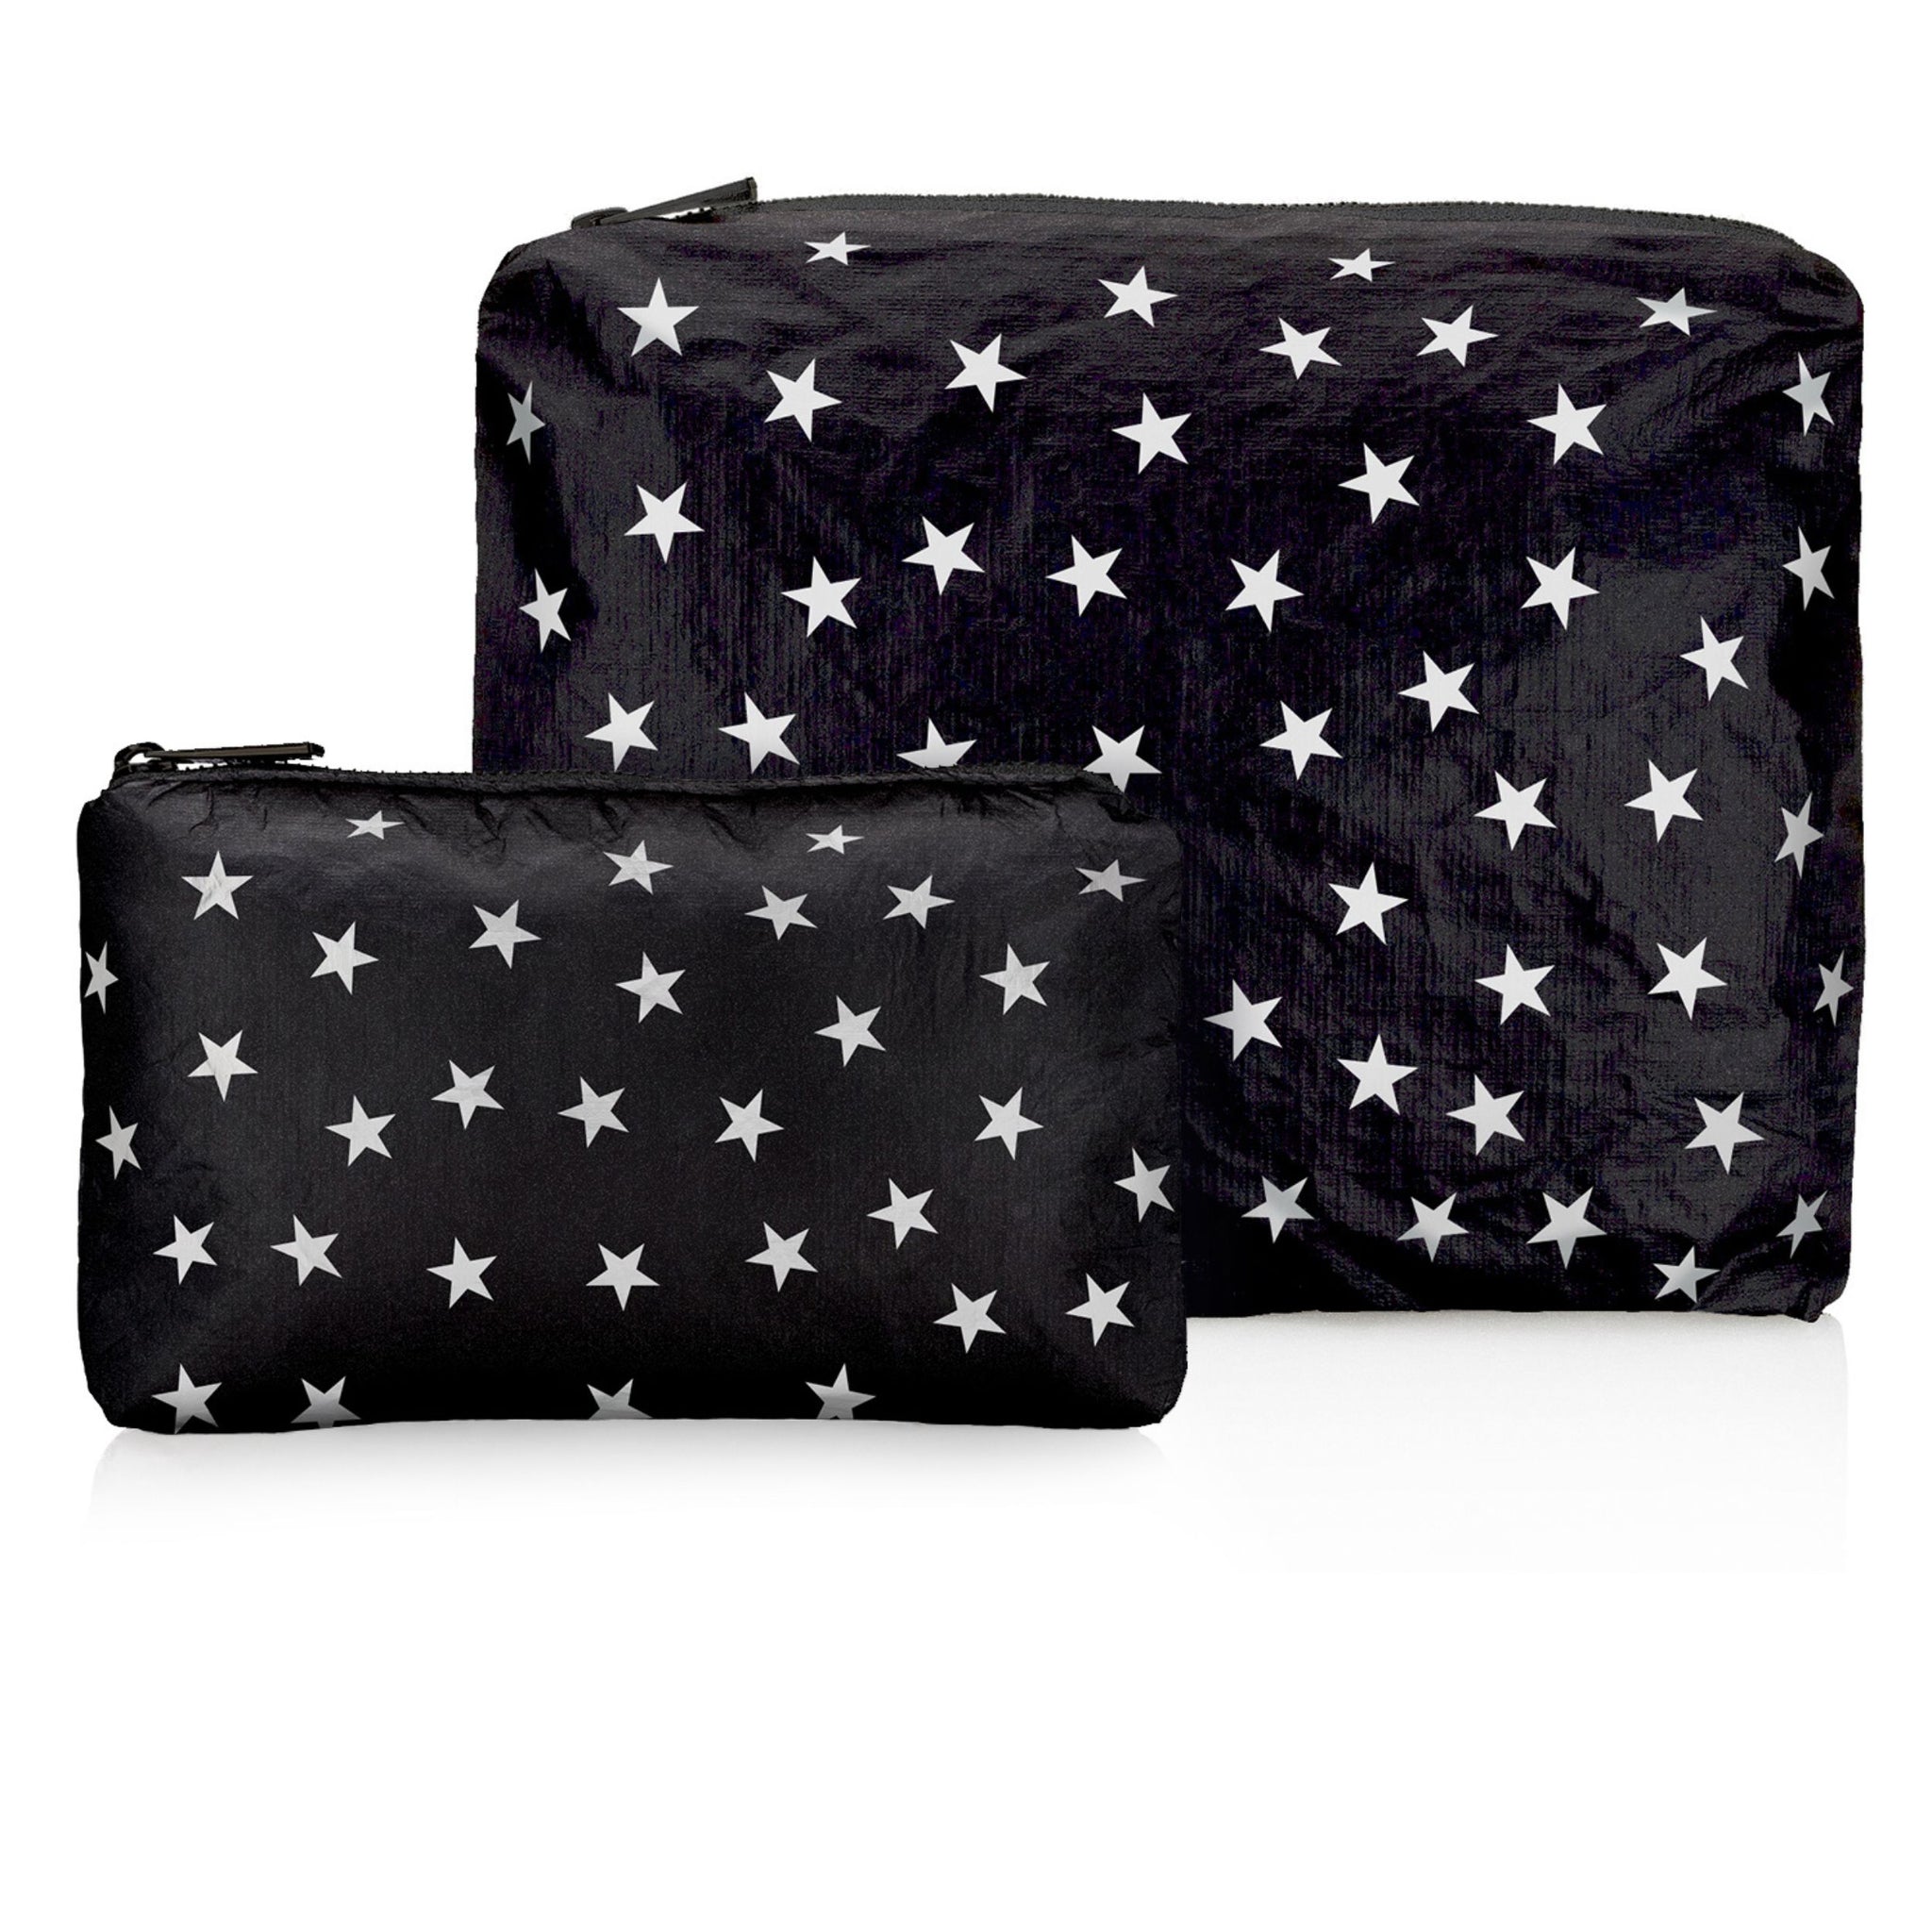 Set of Two - Organizational Packs - Shimmer Black with Myriad White Stars